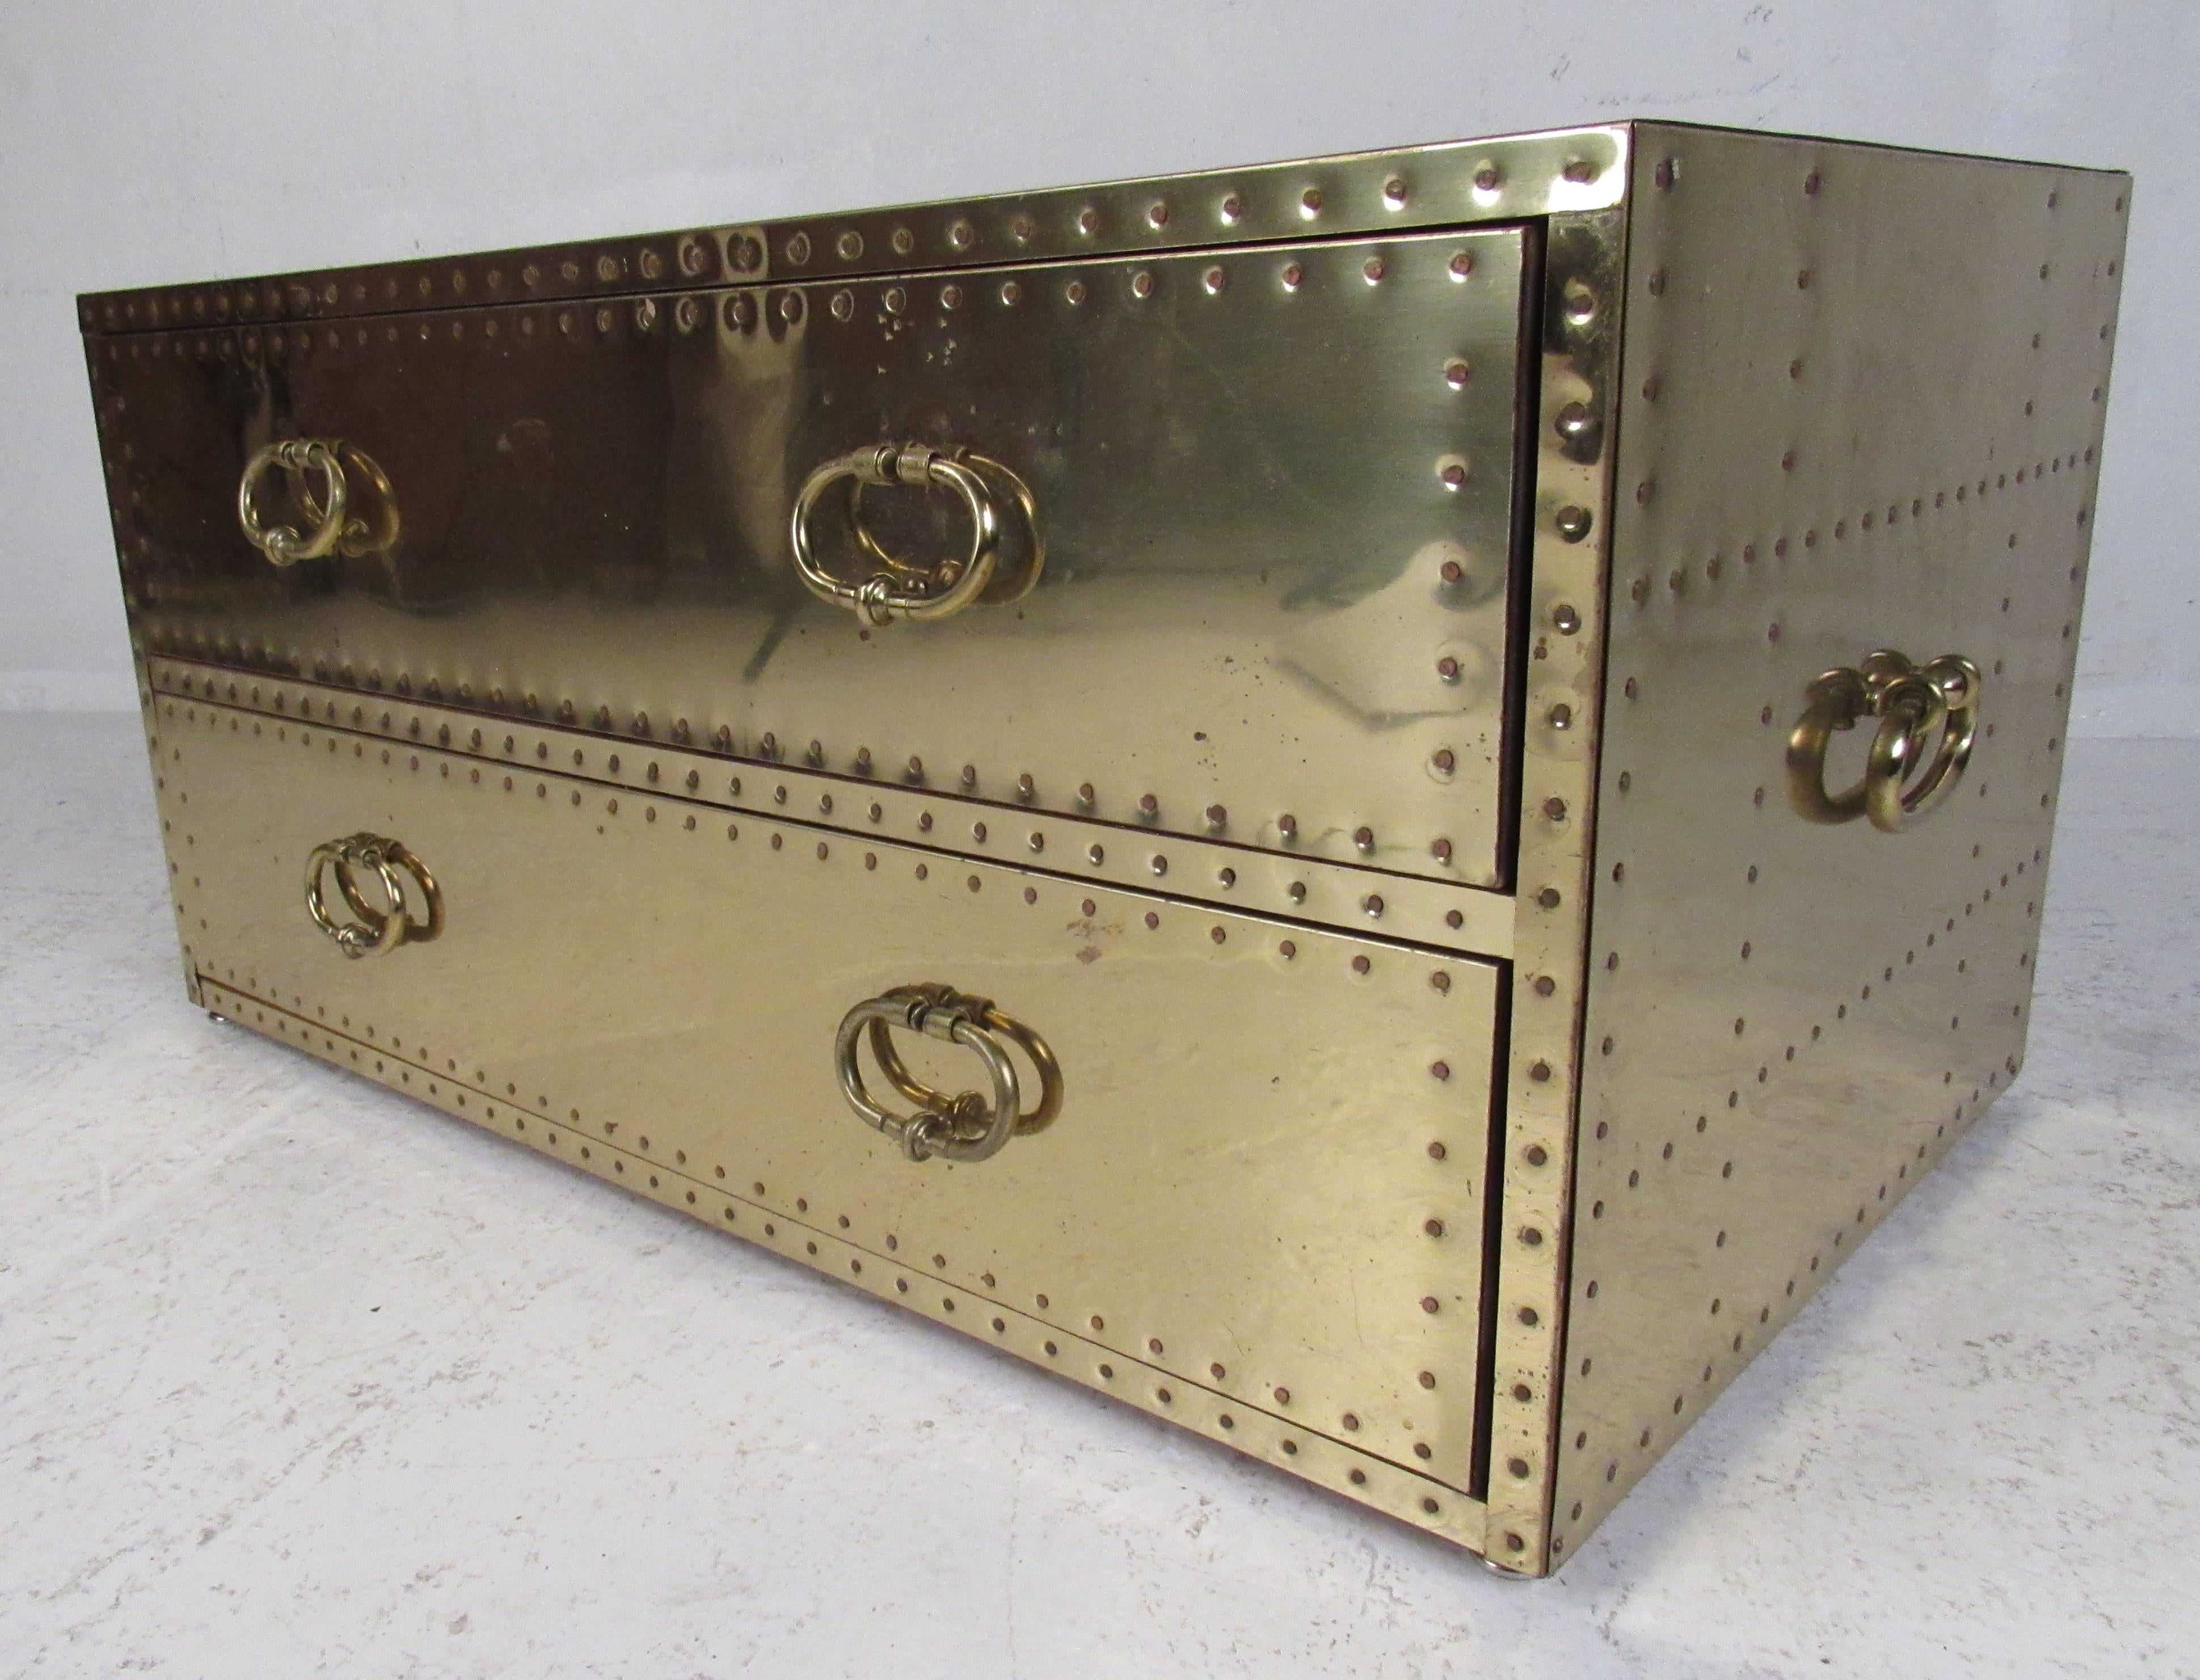 This elegant 1960s brass clad chest with copper tacks has two large drawers ensuring ample storage space. An original Sarreid Ltd label inside the top drawer and wonderful patina adds to the allure. This versatile Spanish midcentury chest or coffee